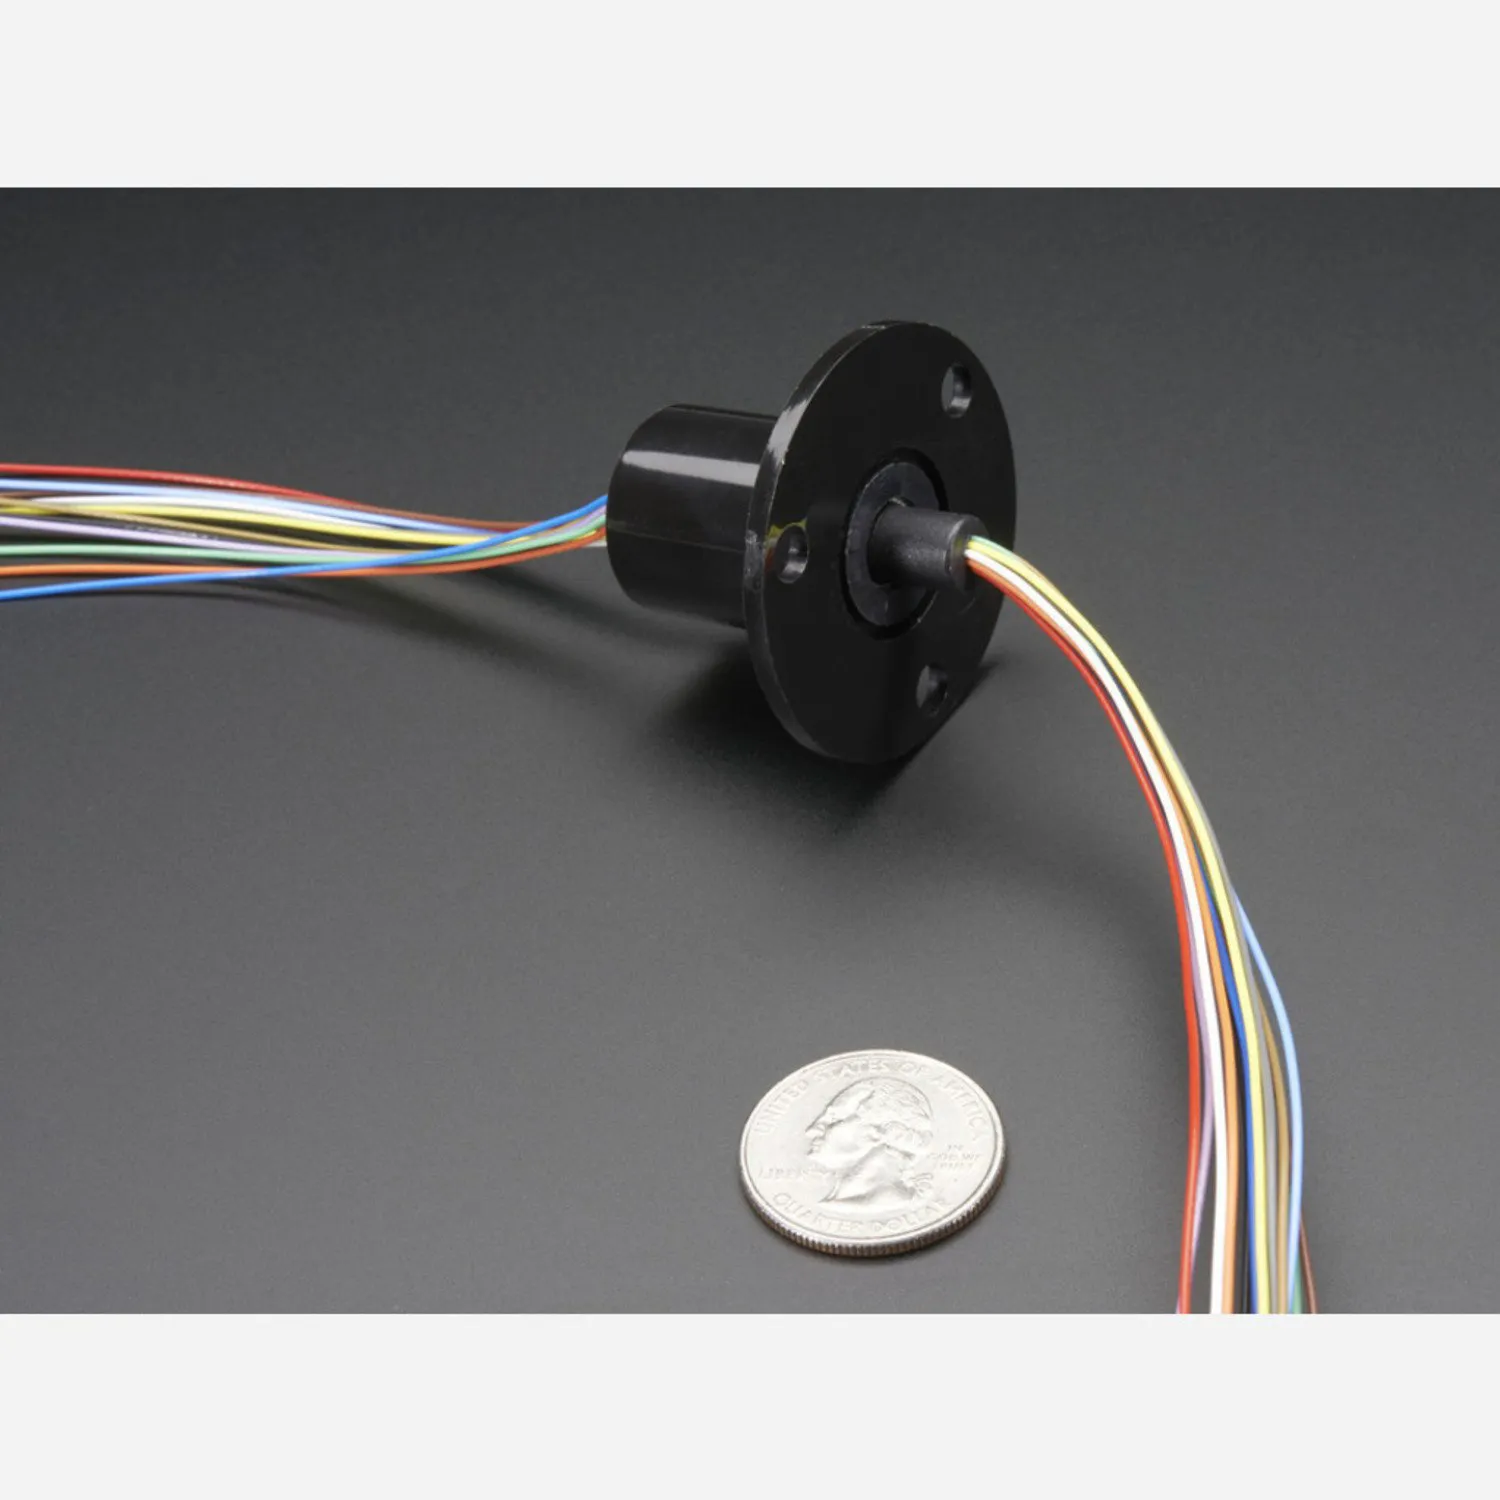 Photo of Slip Ring with Flange - 22mm diameter, 12 wires, max 240V @ 2A